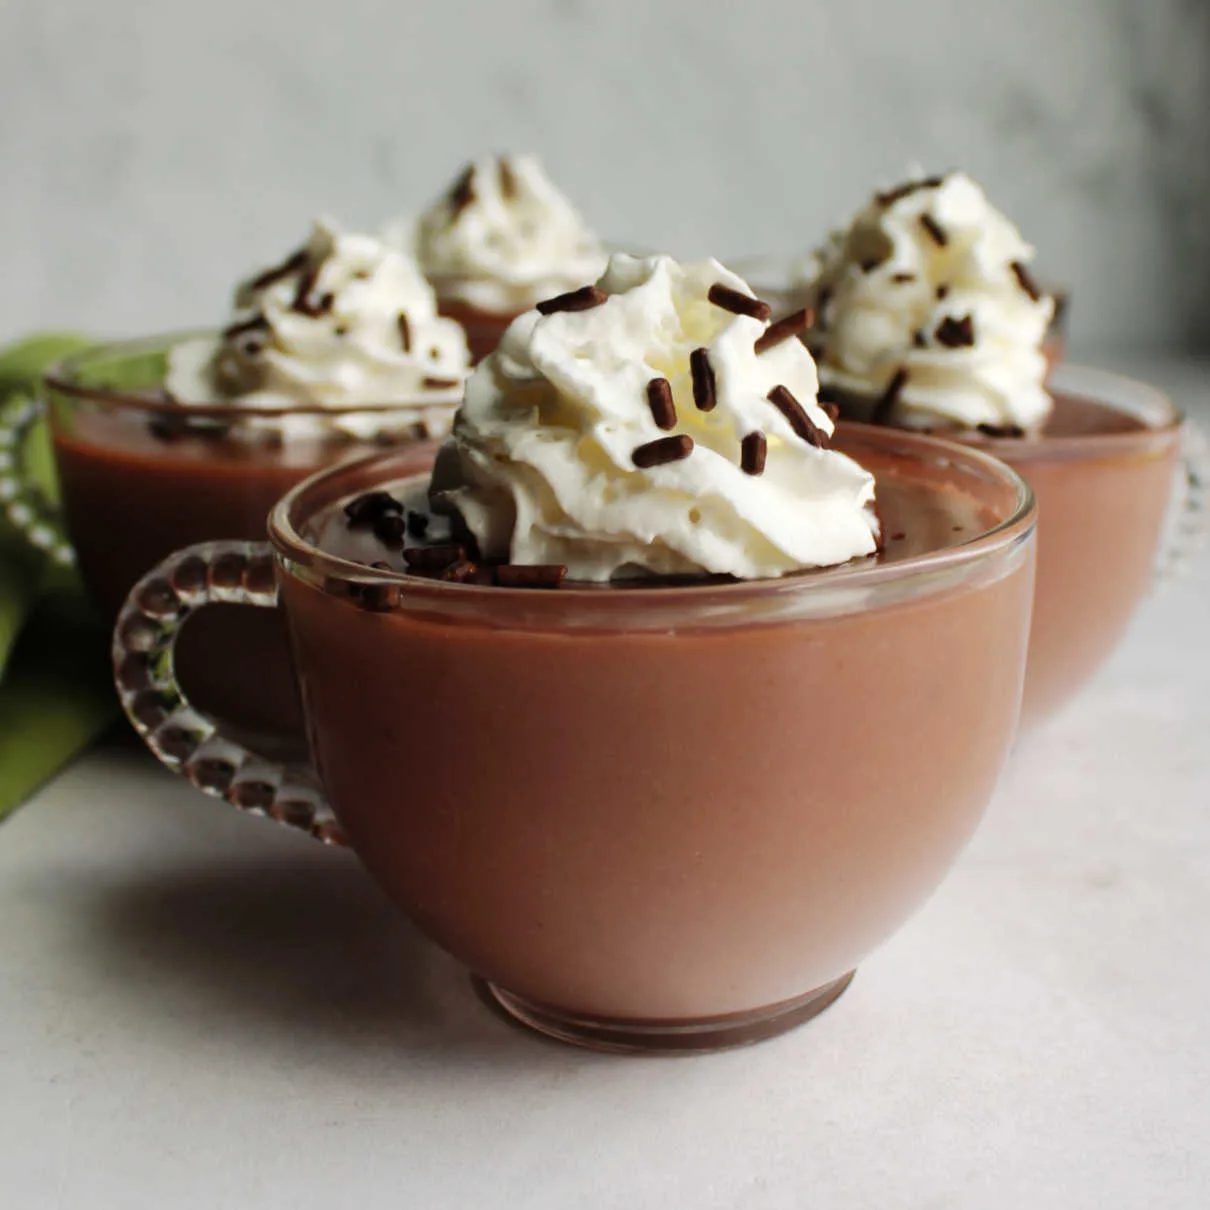 Glass mugs filled with hot chocolate pudding topped with whipped cream and chocolate sprinkles.